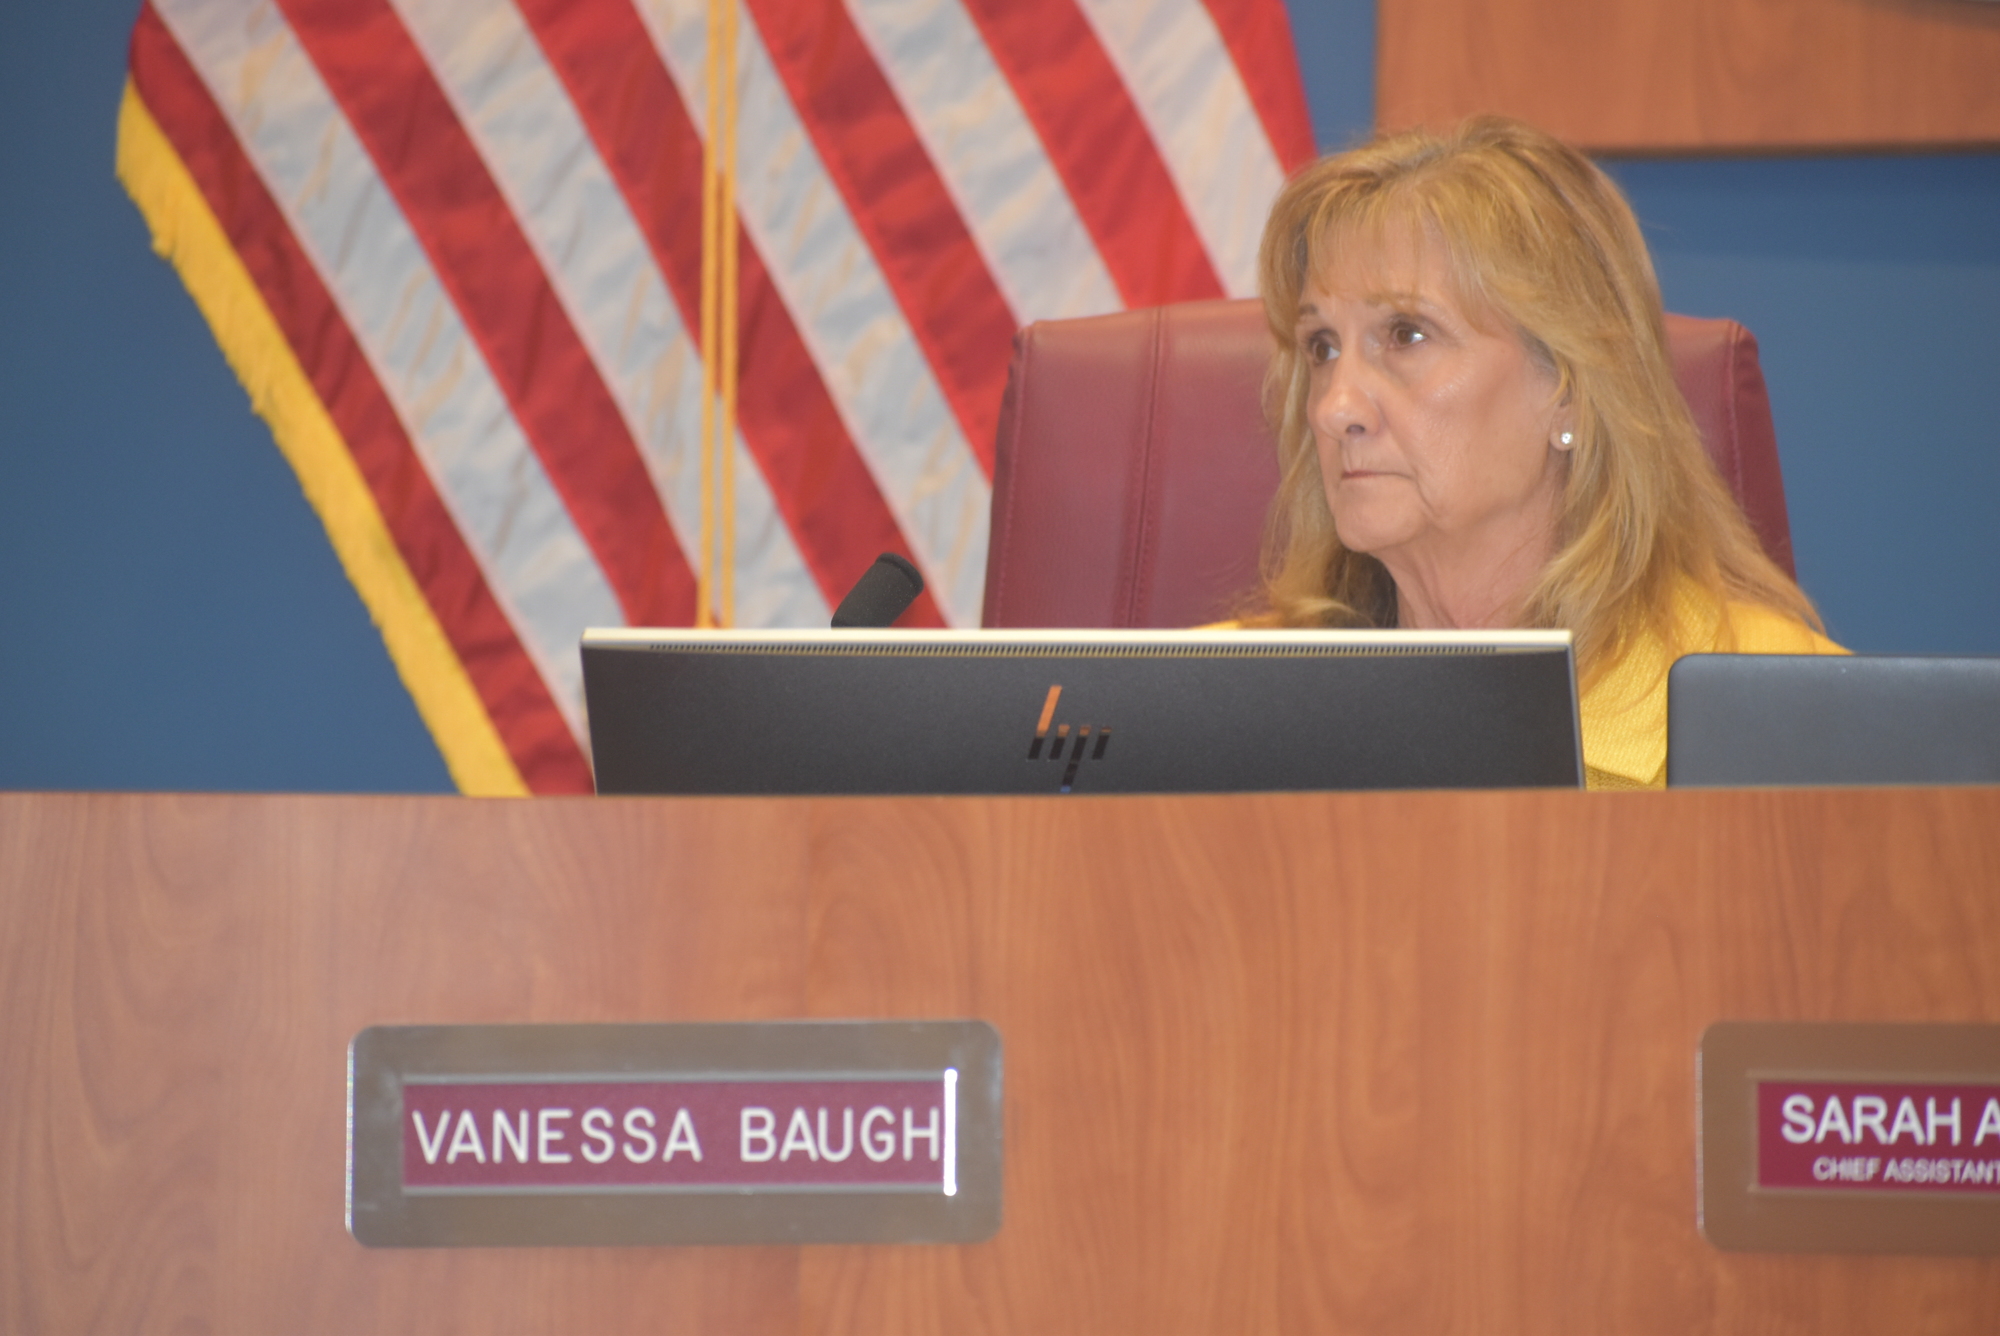 Commissioner Vanessa Baugh said some roads that were not on the county's capital improvement plan have been accelerated to high-priority projects because growth has happened in unanticipated areas.